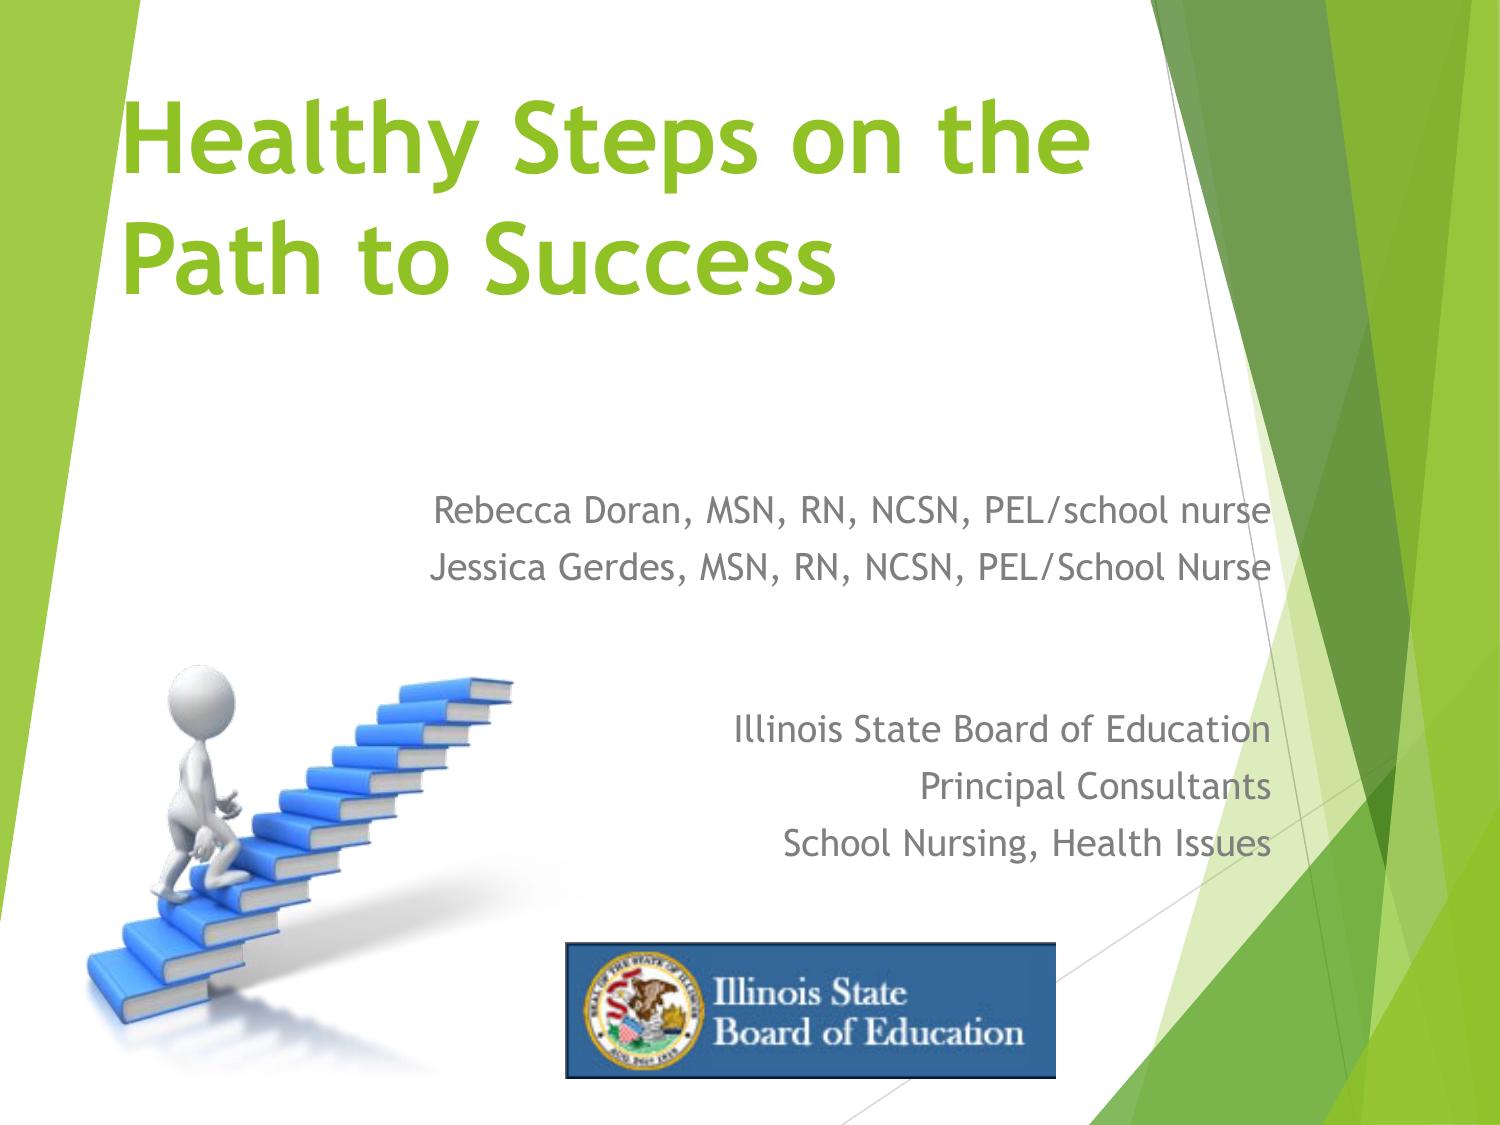 Developing School Health Policy, Procedures, and Protocols: Please!